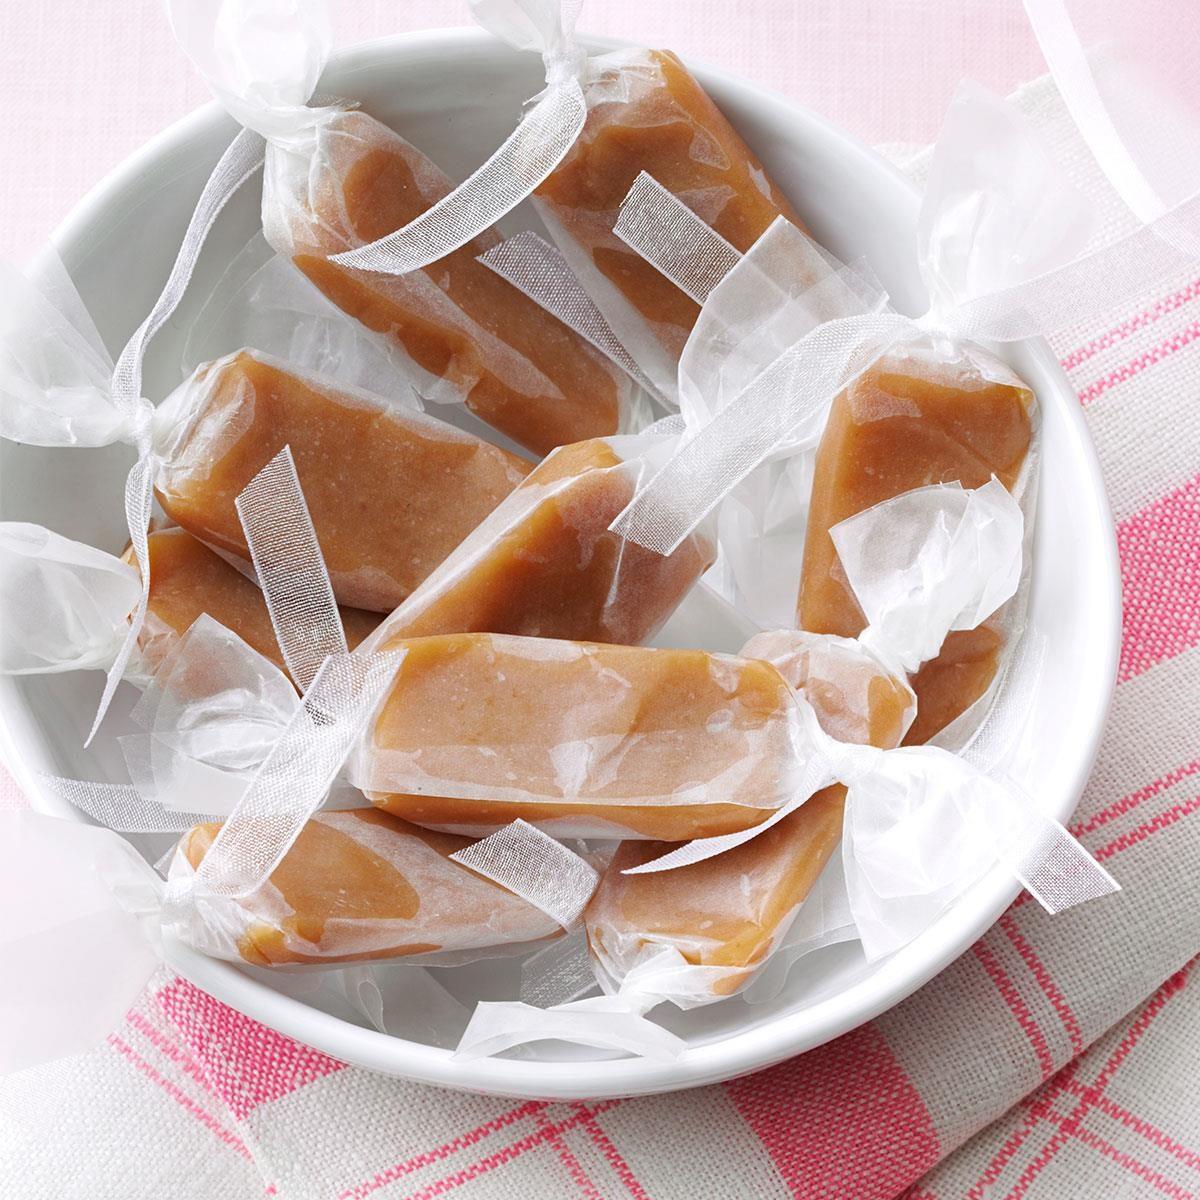 https://www.tasteofhome.com/wp-content/uploads/2018/01/Soft-Chewy-Caramels_exps21896_CK133085B06_18_6bC_RMS-1.jpg?fit=680%2C680